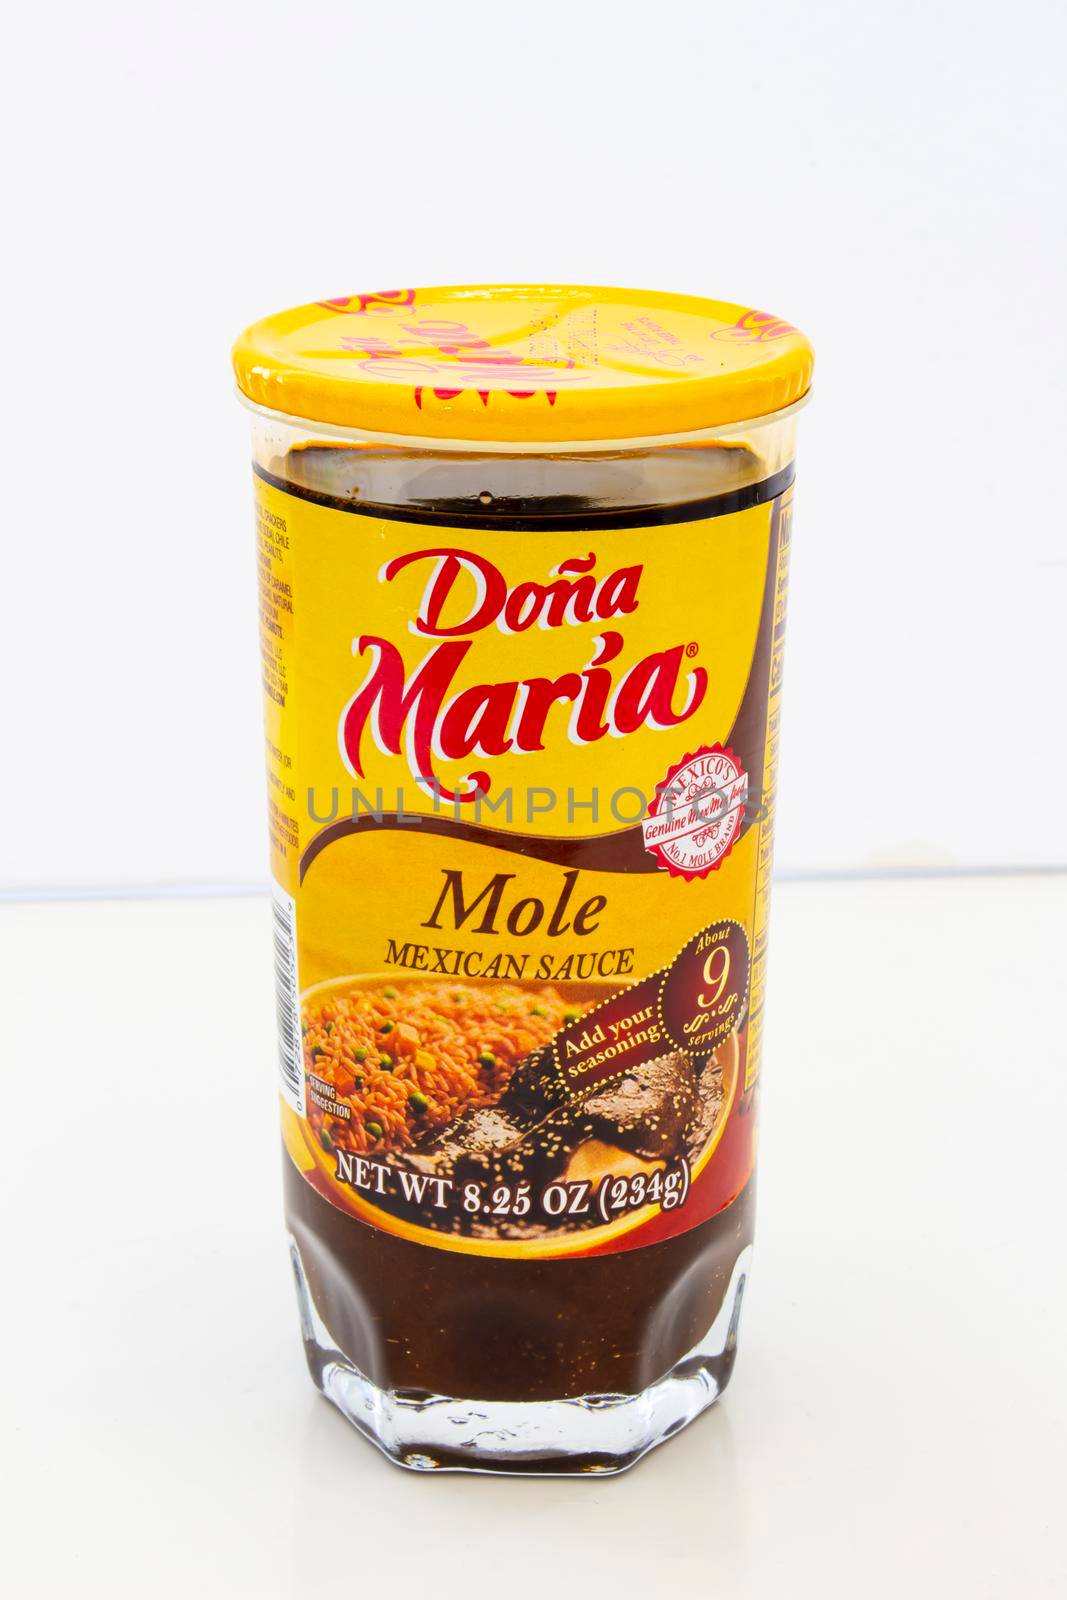 Calgary, Alberta, Canada. April 21, 2021. Mole brand Dona Maria, is a traditional marinade and sauce originally used in Mexican cuisine. by oasisamuel